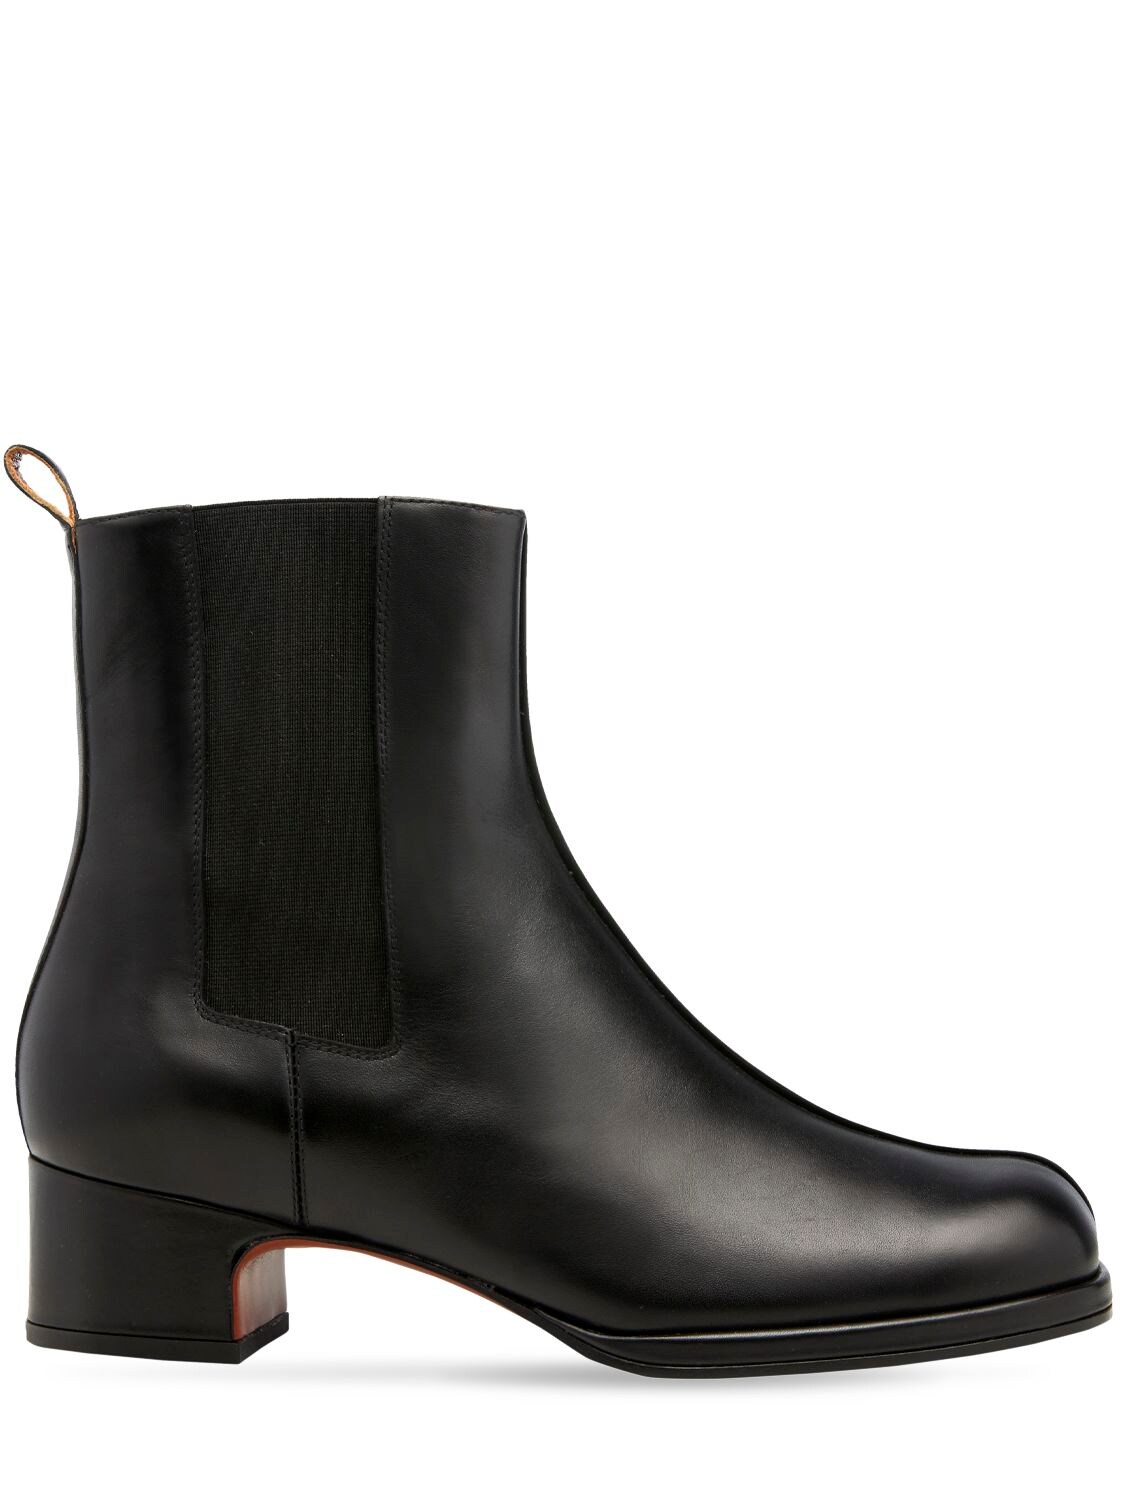 40mm Square Toe Chelsea Boots